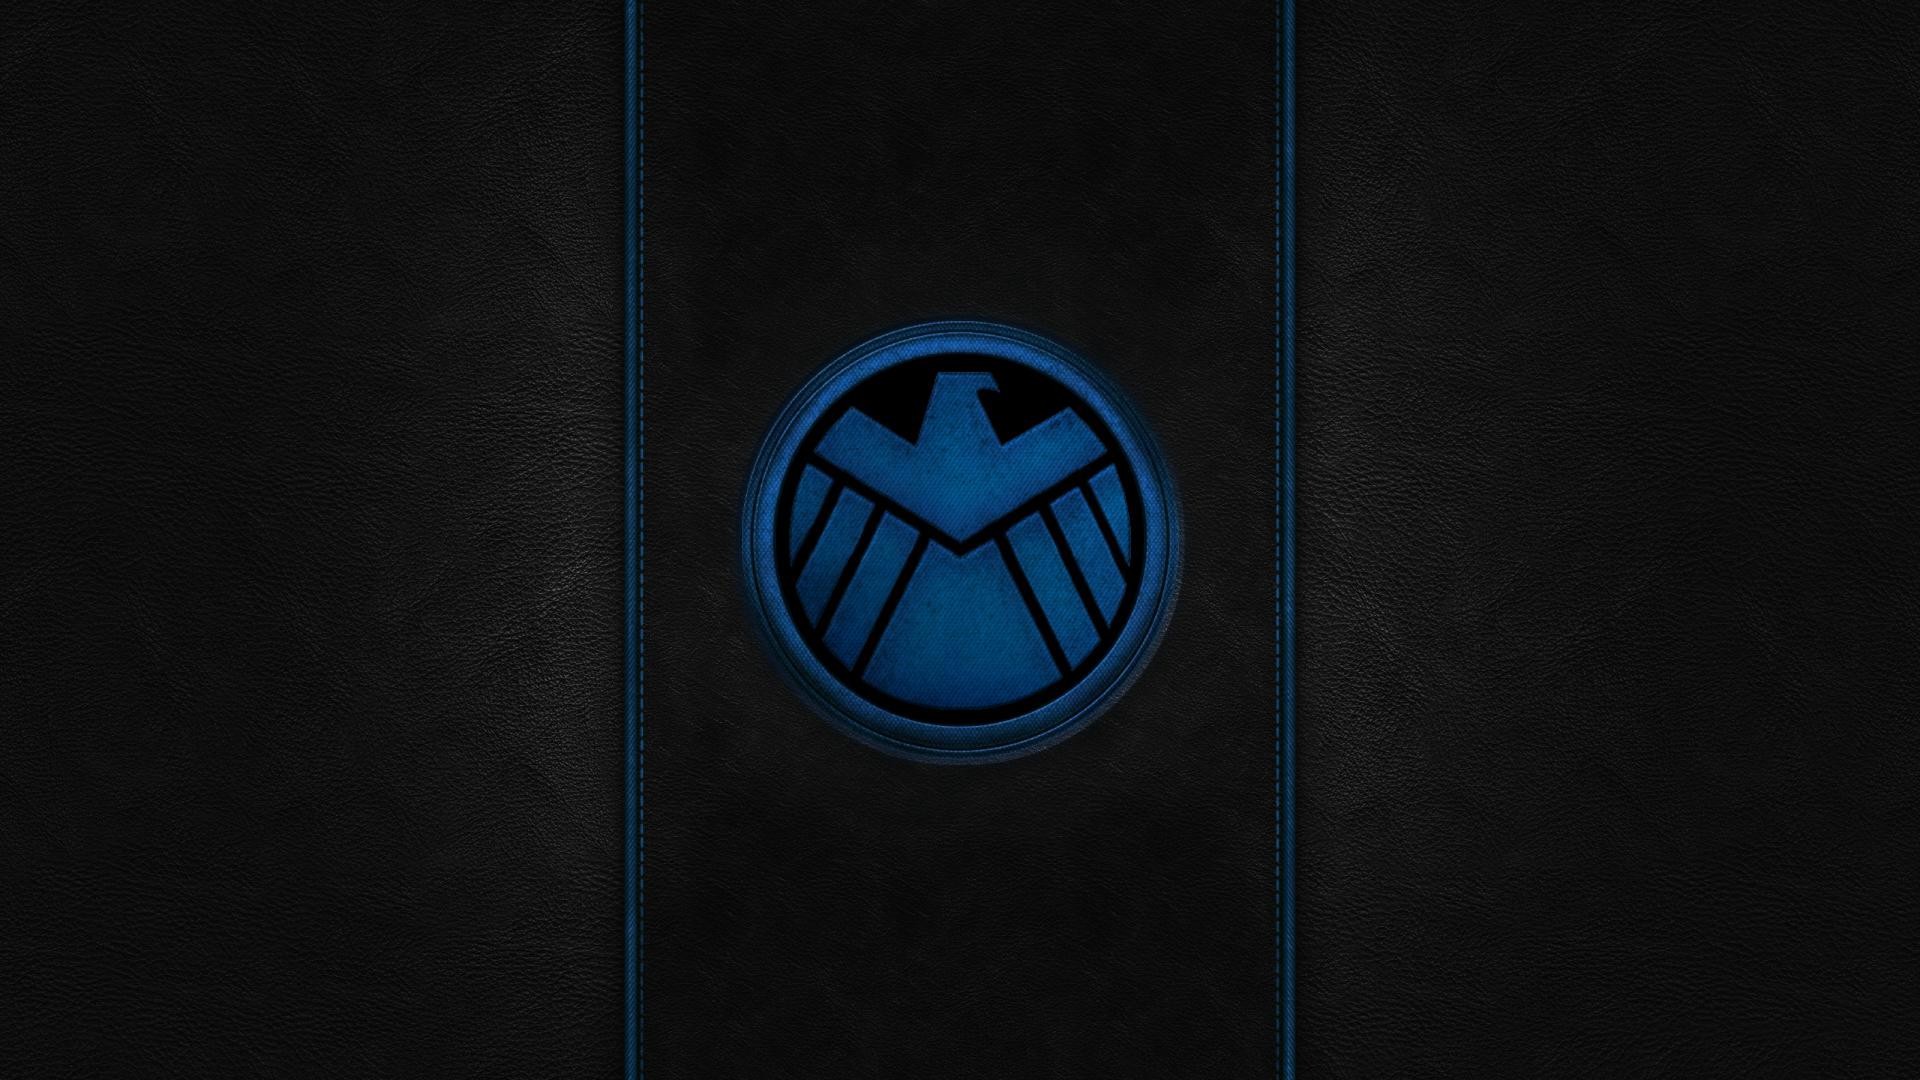 Wallpaper.wiki Shield Backgrounds PIC WPE004028